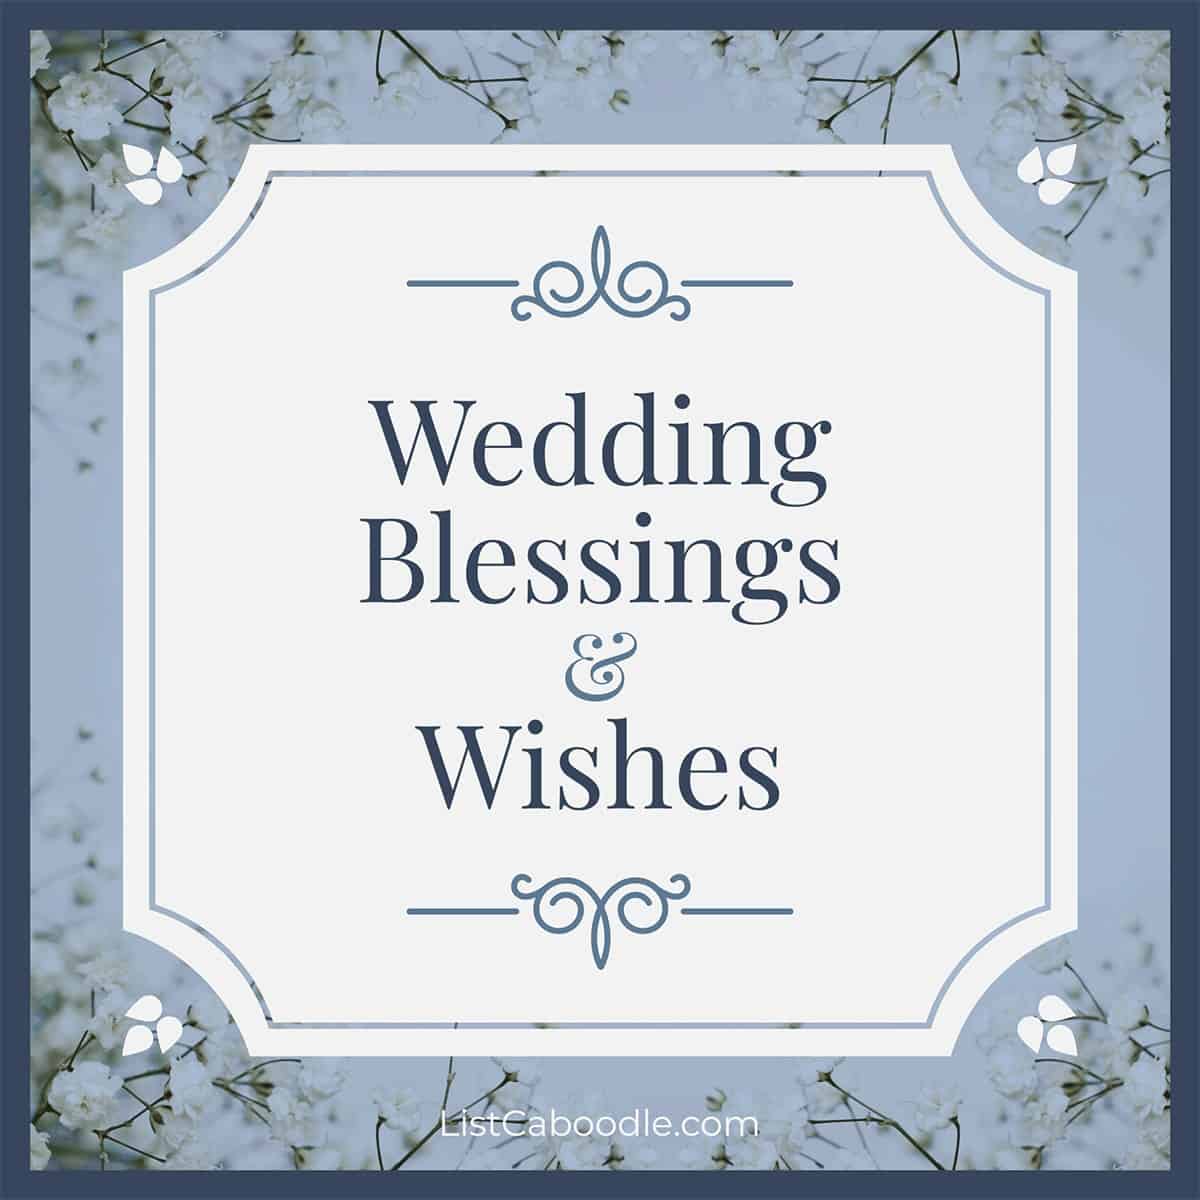 wedding blessings wishes